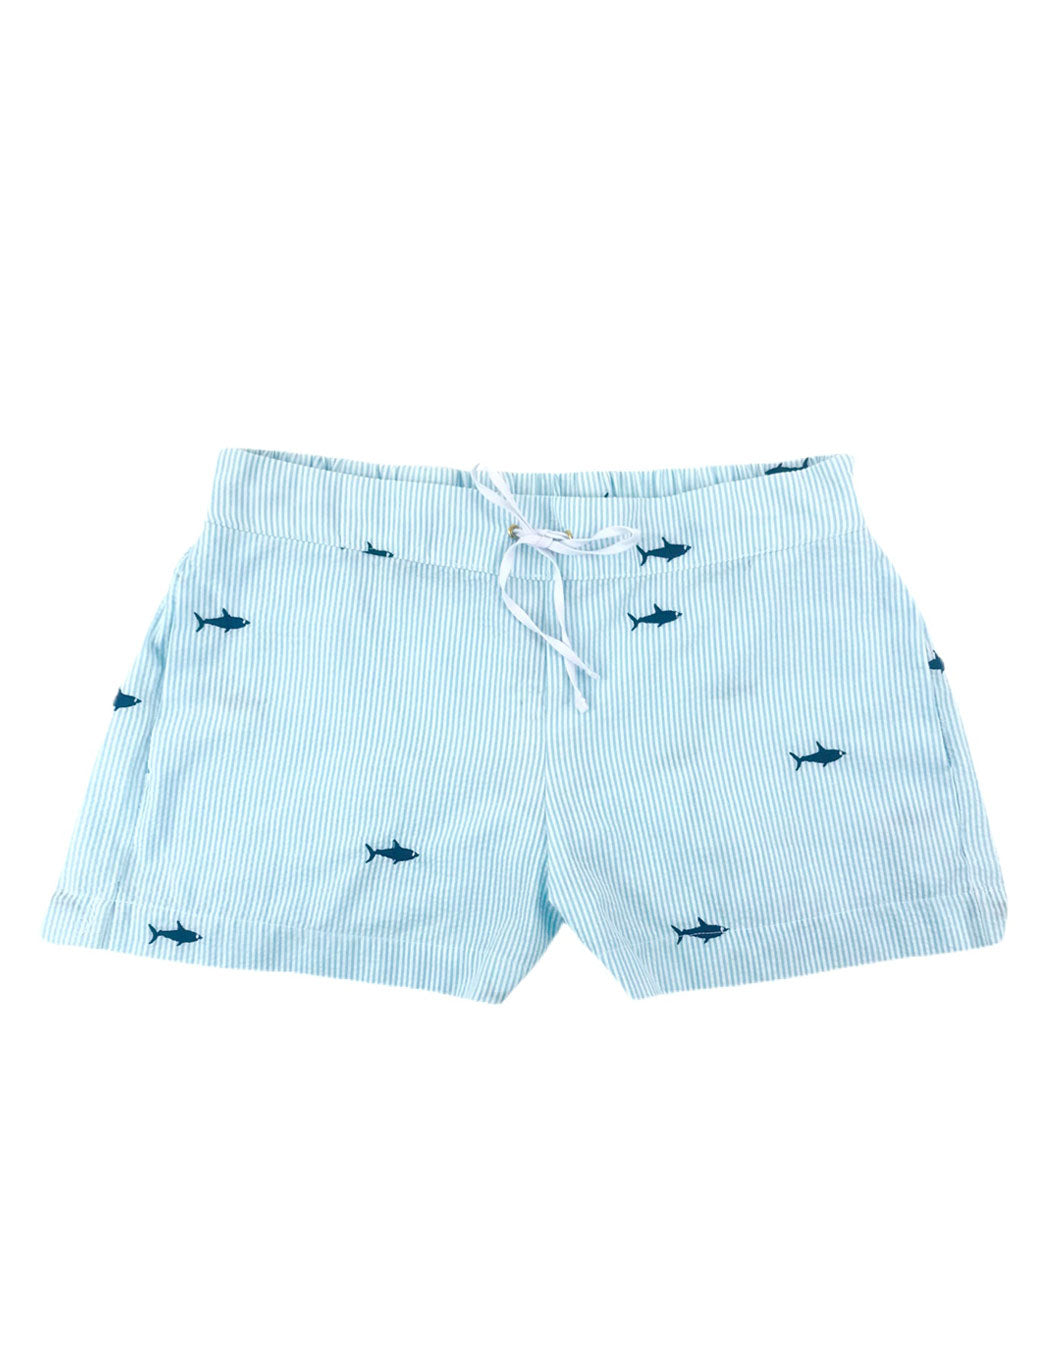 Turquoise Seersucker Women's Lounge Short with Navy Embroidered Sharks